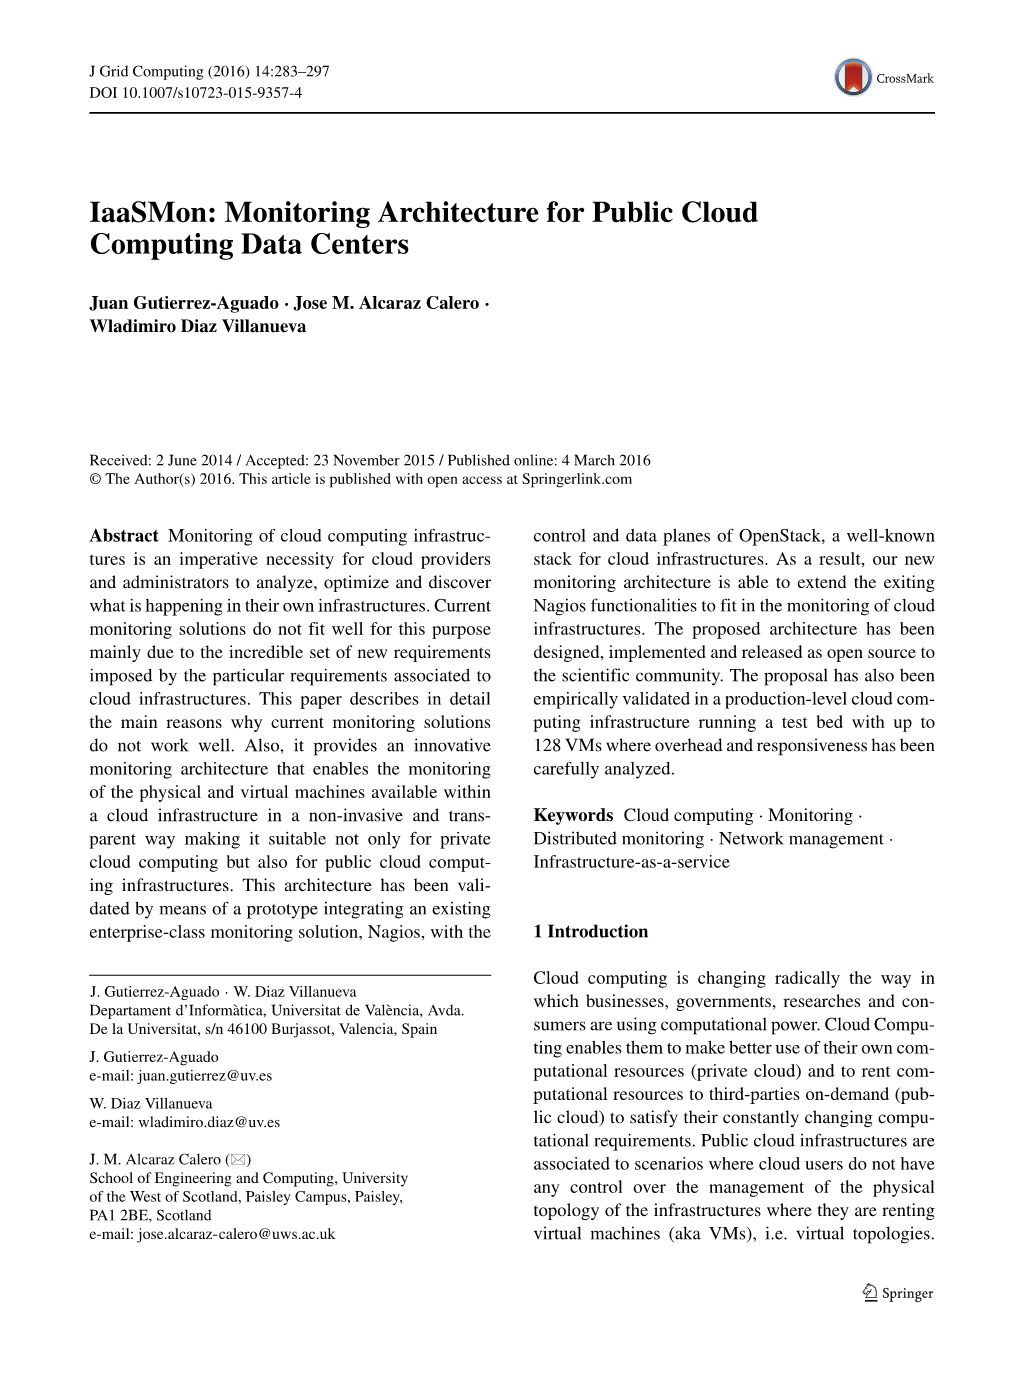 Monitoring Architecture for Public Cloud Computing Data Centers